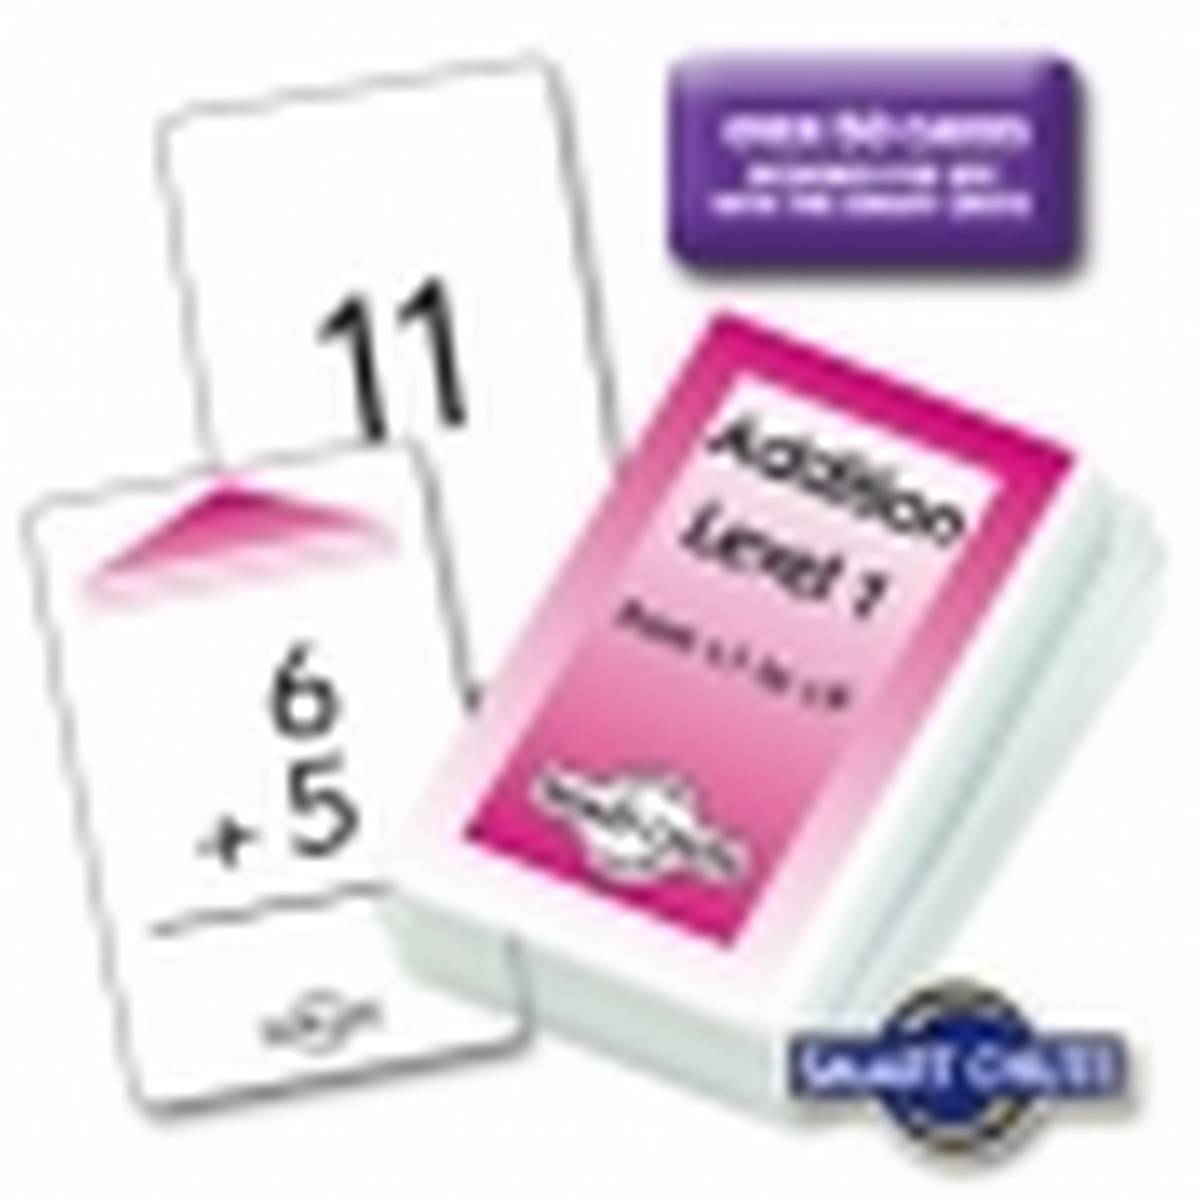 Addition Facts Chute Cards - Vertical Sums